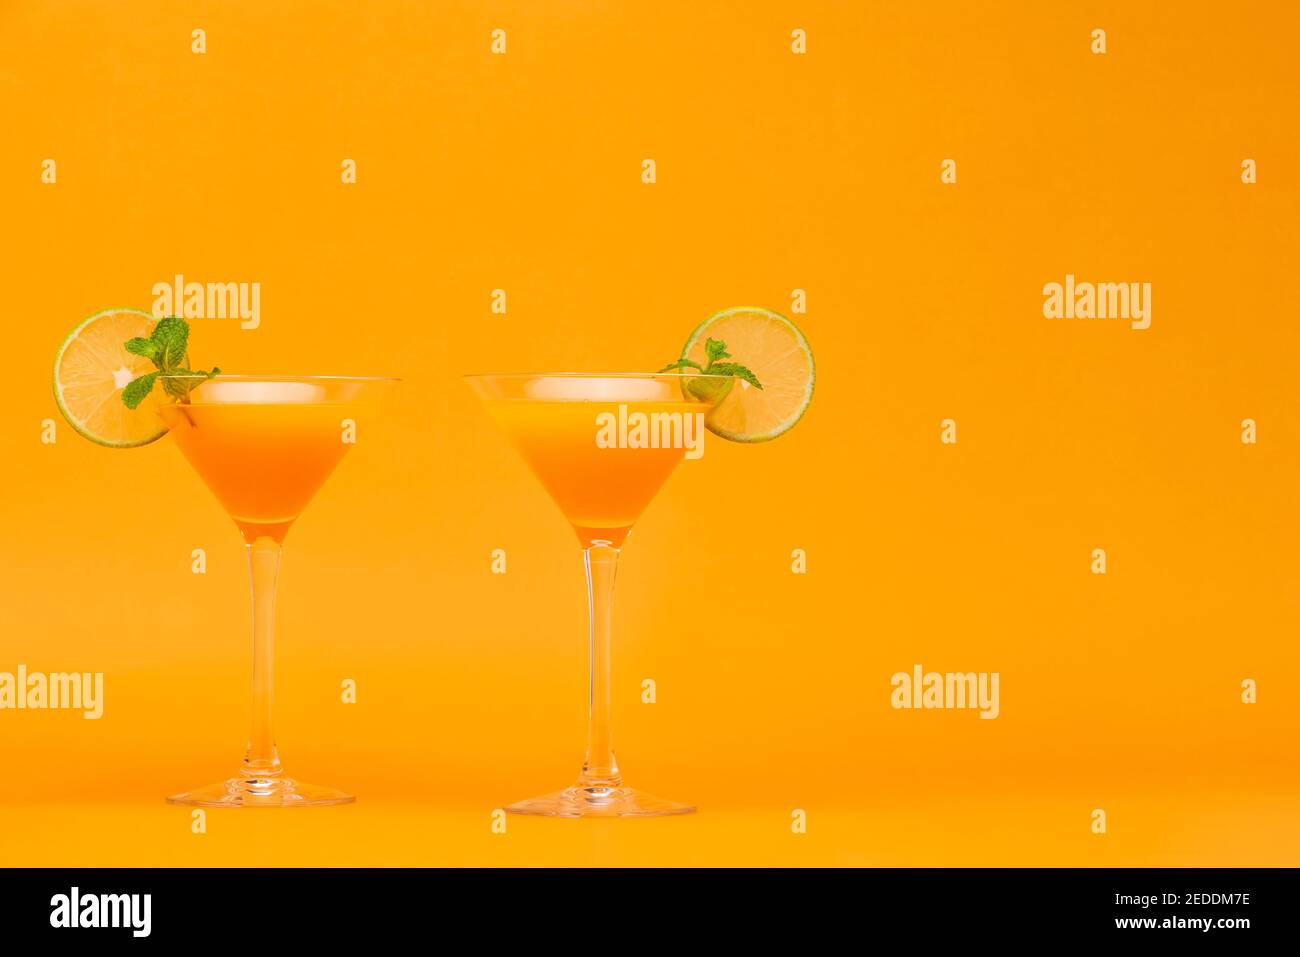 Refreshing orange juice cocktail drinks in the glasses on colorful background Stock Photo